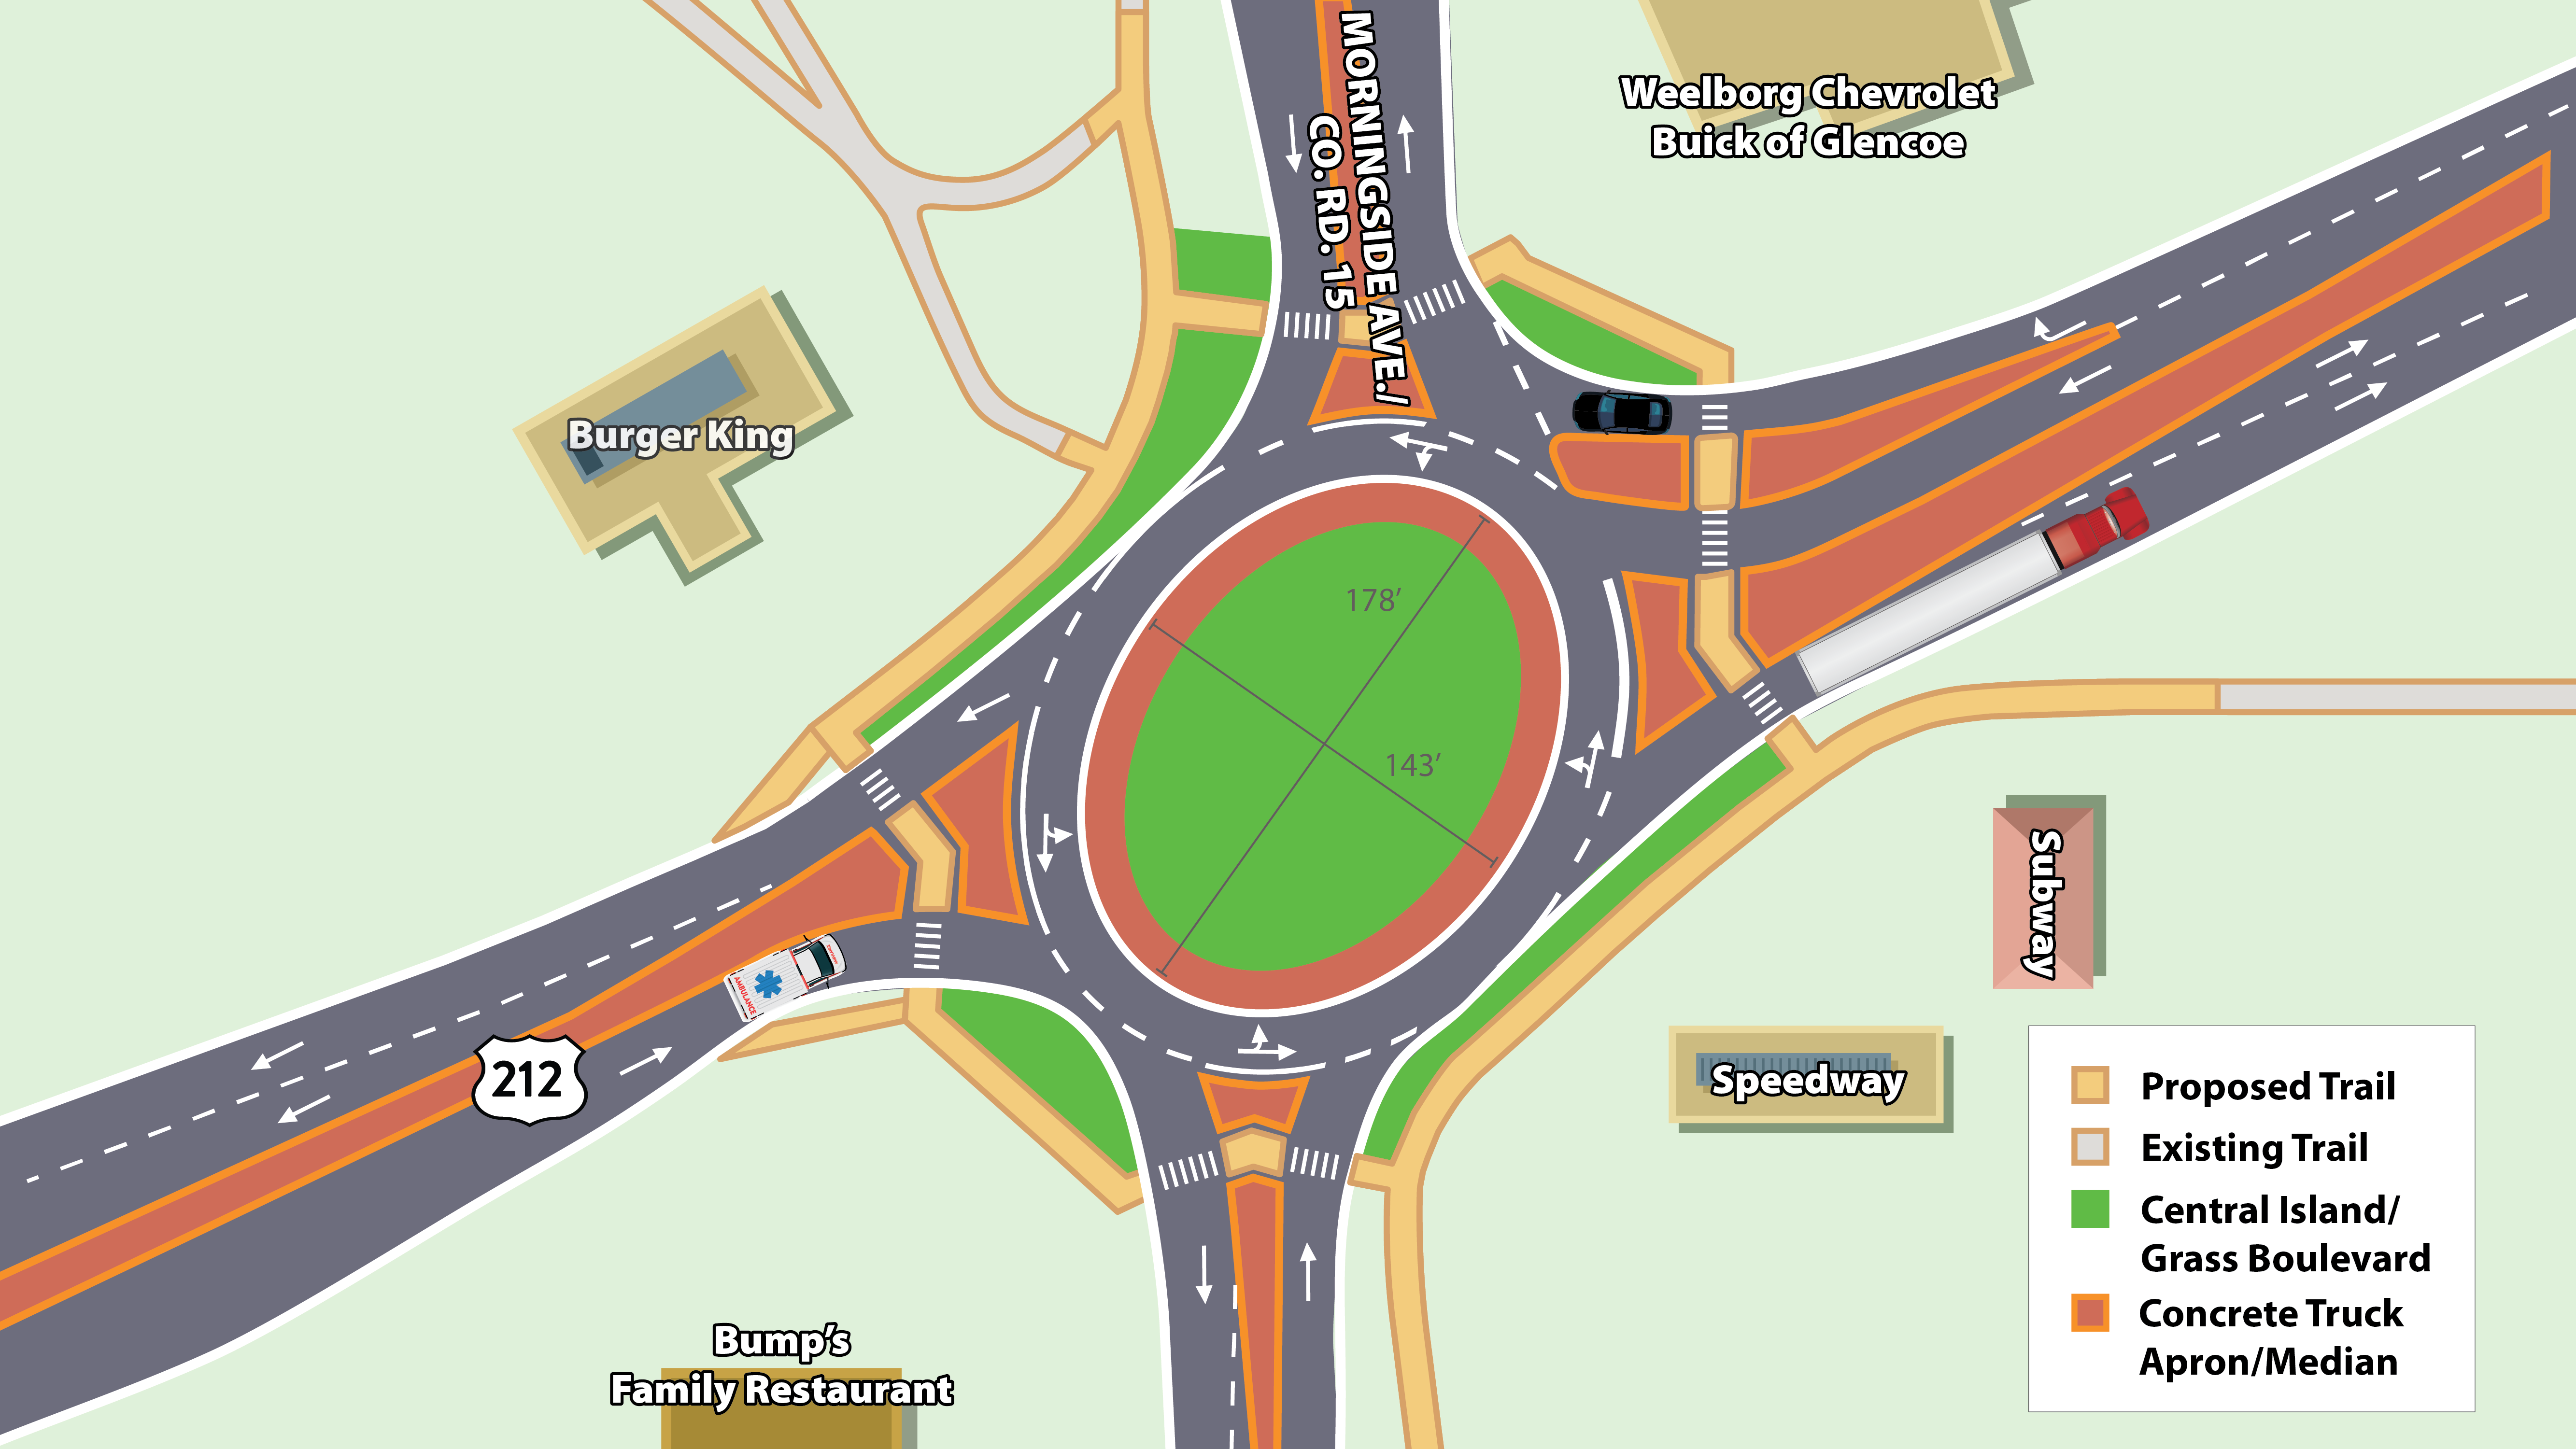 Graphic of roundabout design that shows oval-shaped roundabout with a 22' travel lane, merging from two to one lane when approaching the roundabout on Hwy 212, a separated right turn lane on the east leg of the roundabout, one travel lane in each direction on the north and south legs of the roundabout.